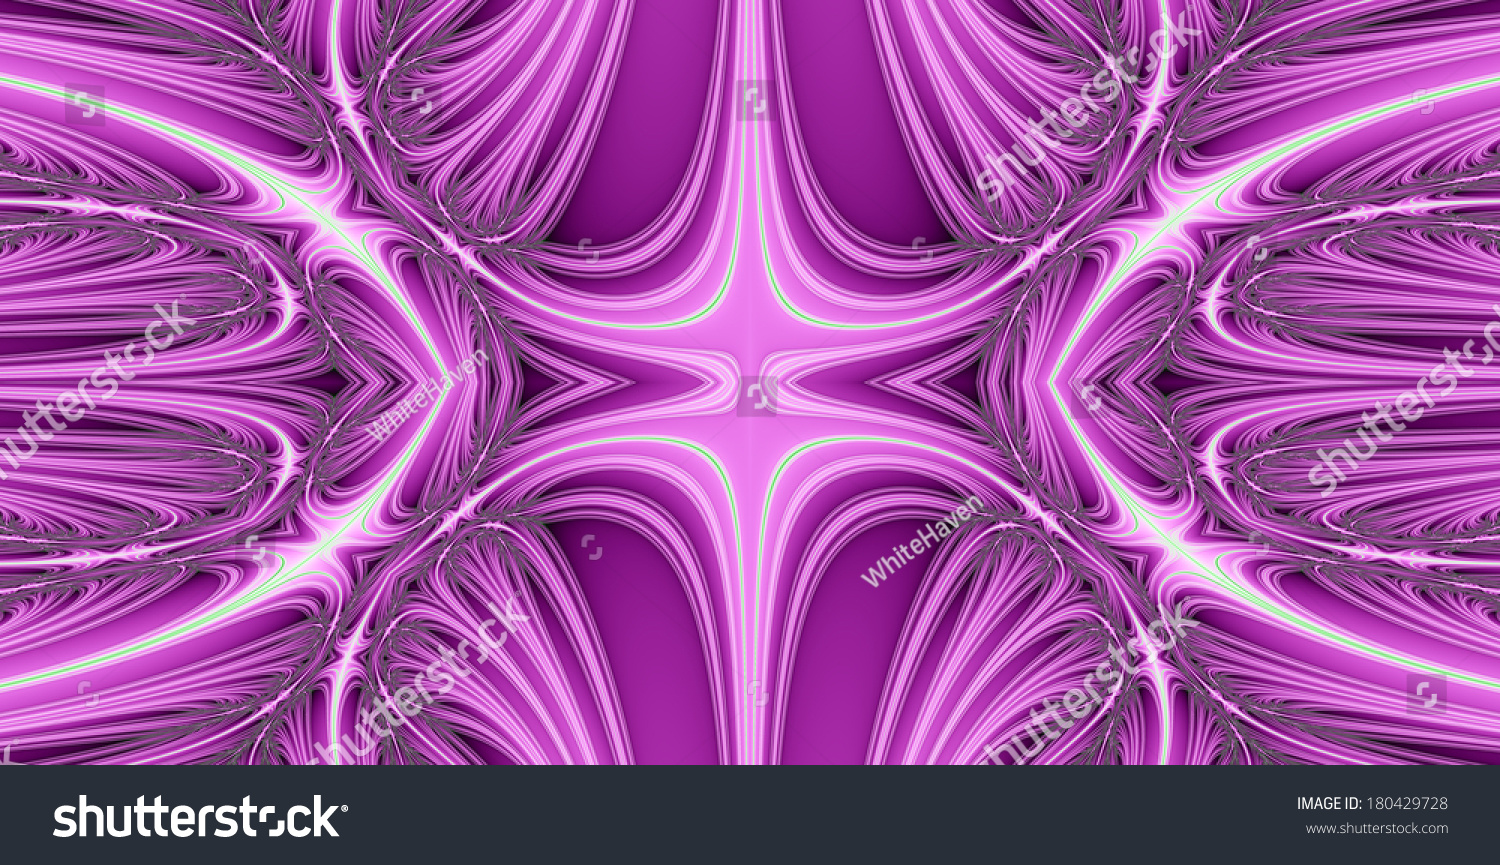 Abstract fractal background with a detailed balanced wavy texture connected to a central decorative flower/star pattern in pink color #180429728